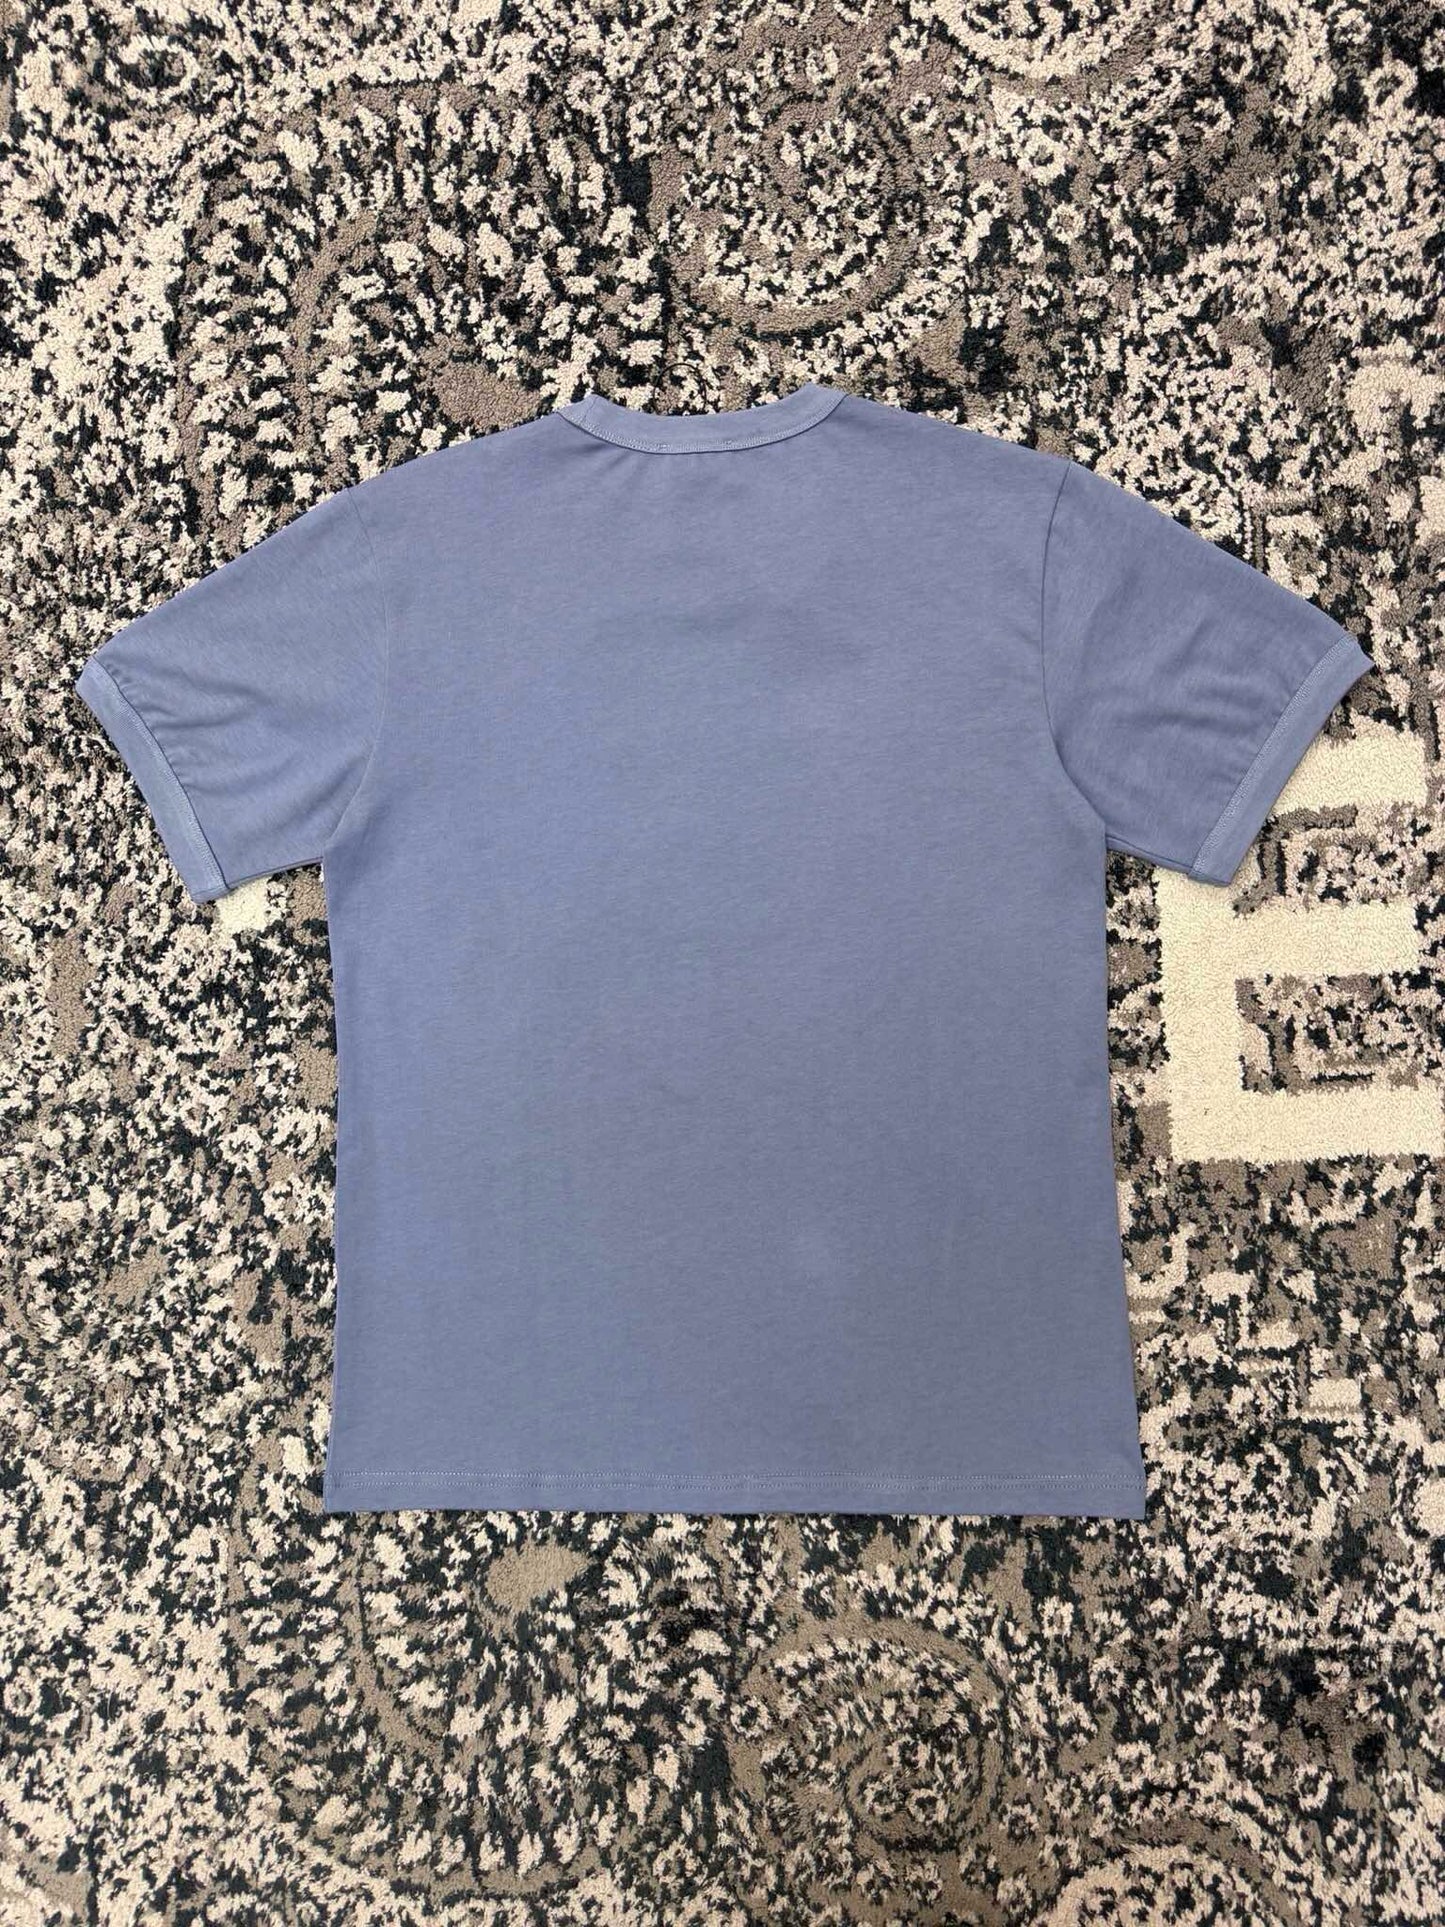 White and Sky blue T-shirt